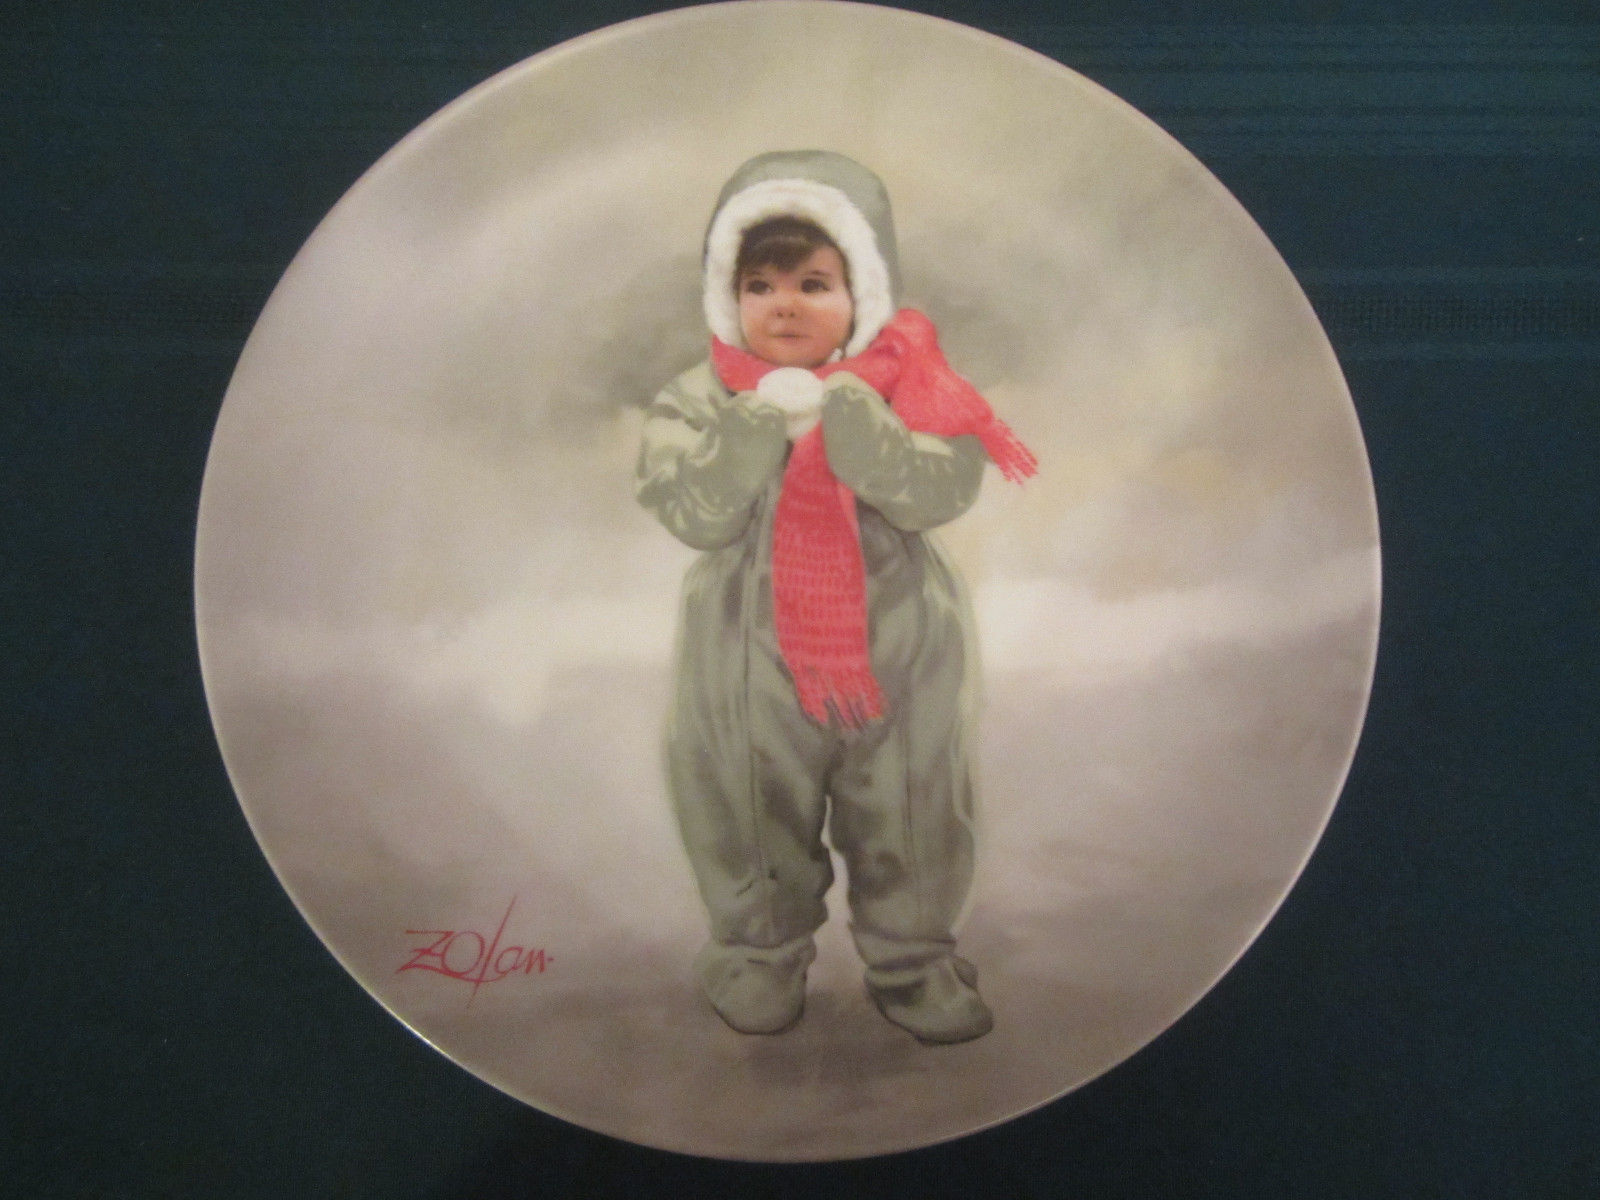 Donald Zolan Wonder of Childhood Collection Plates 